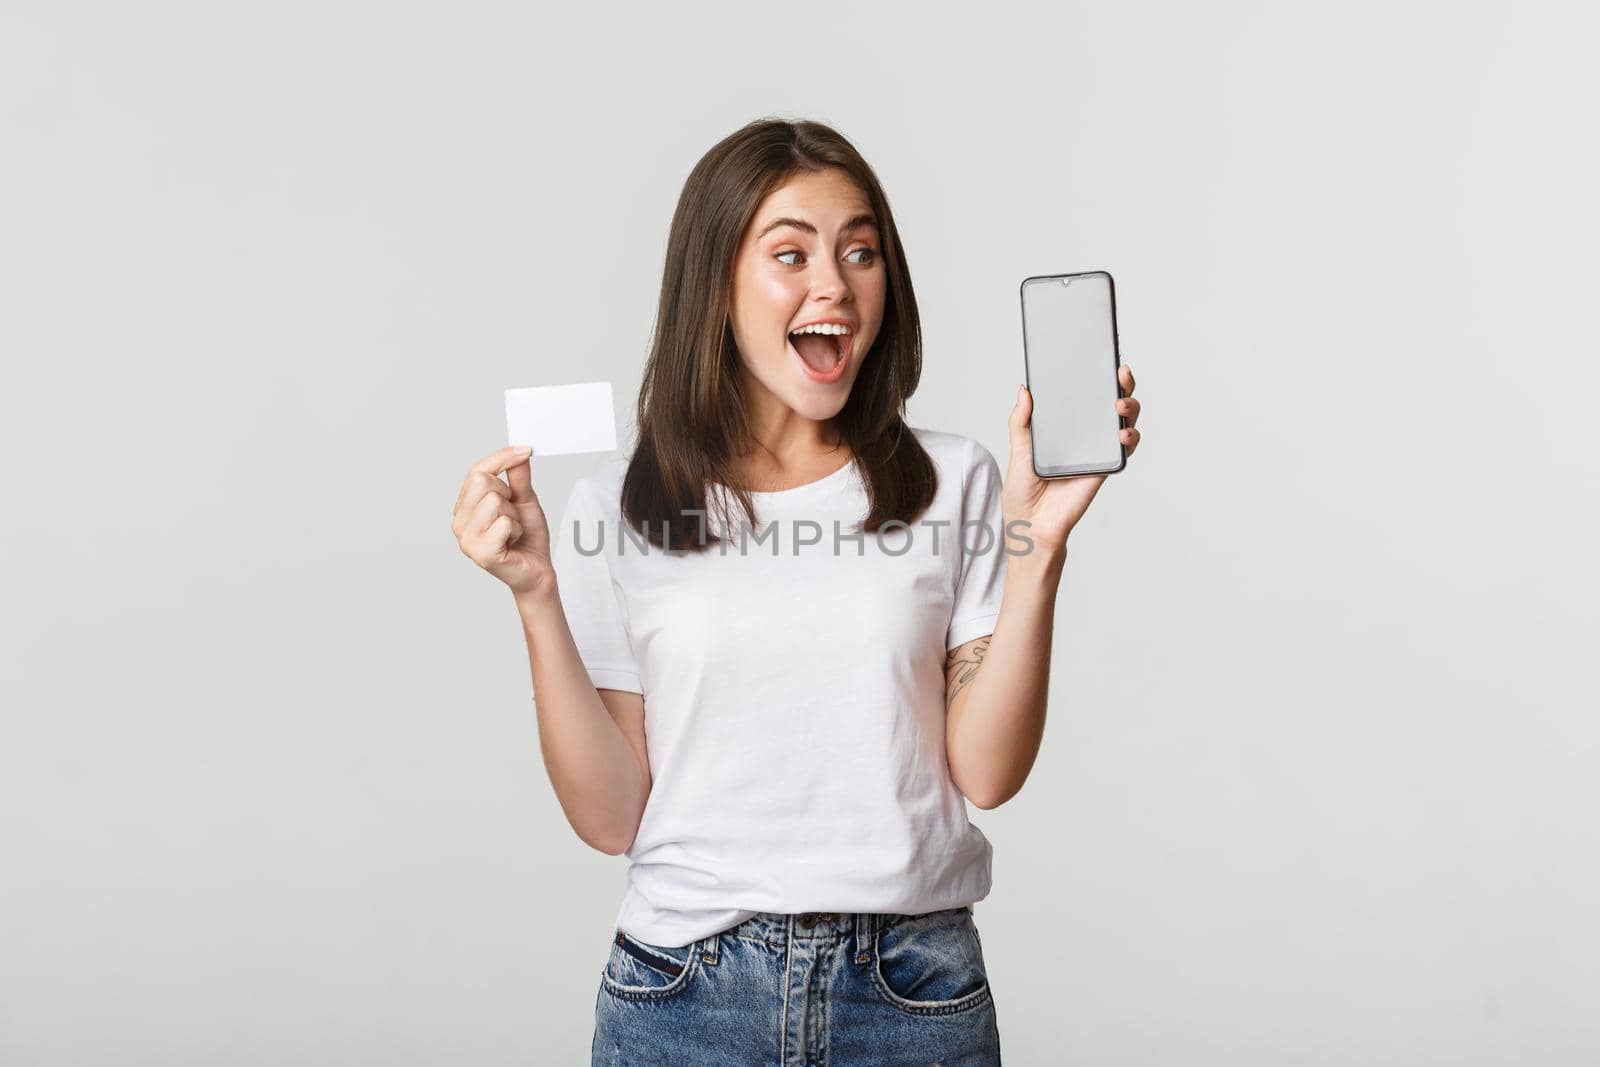 Excited and surprised cute girl showing credit card and mobile phone banking app on screen.